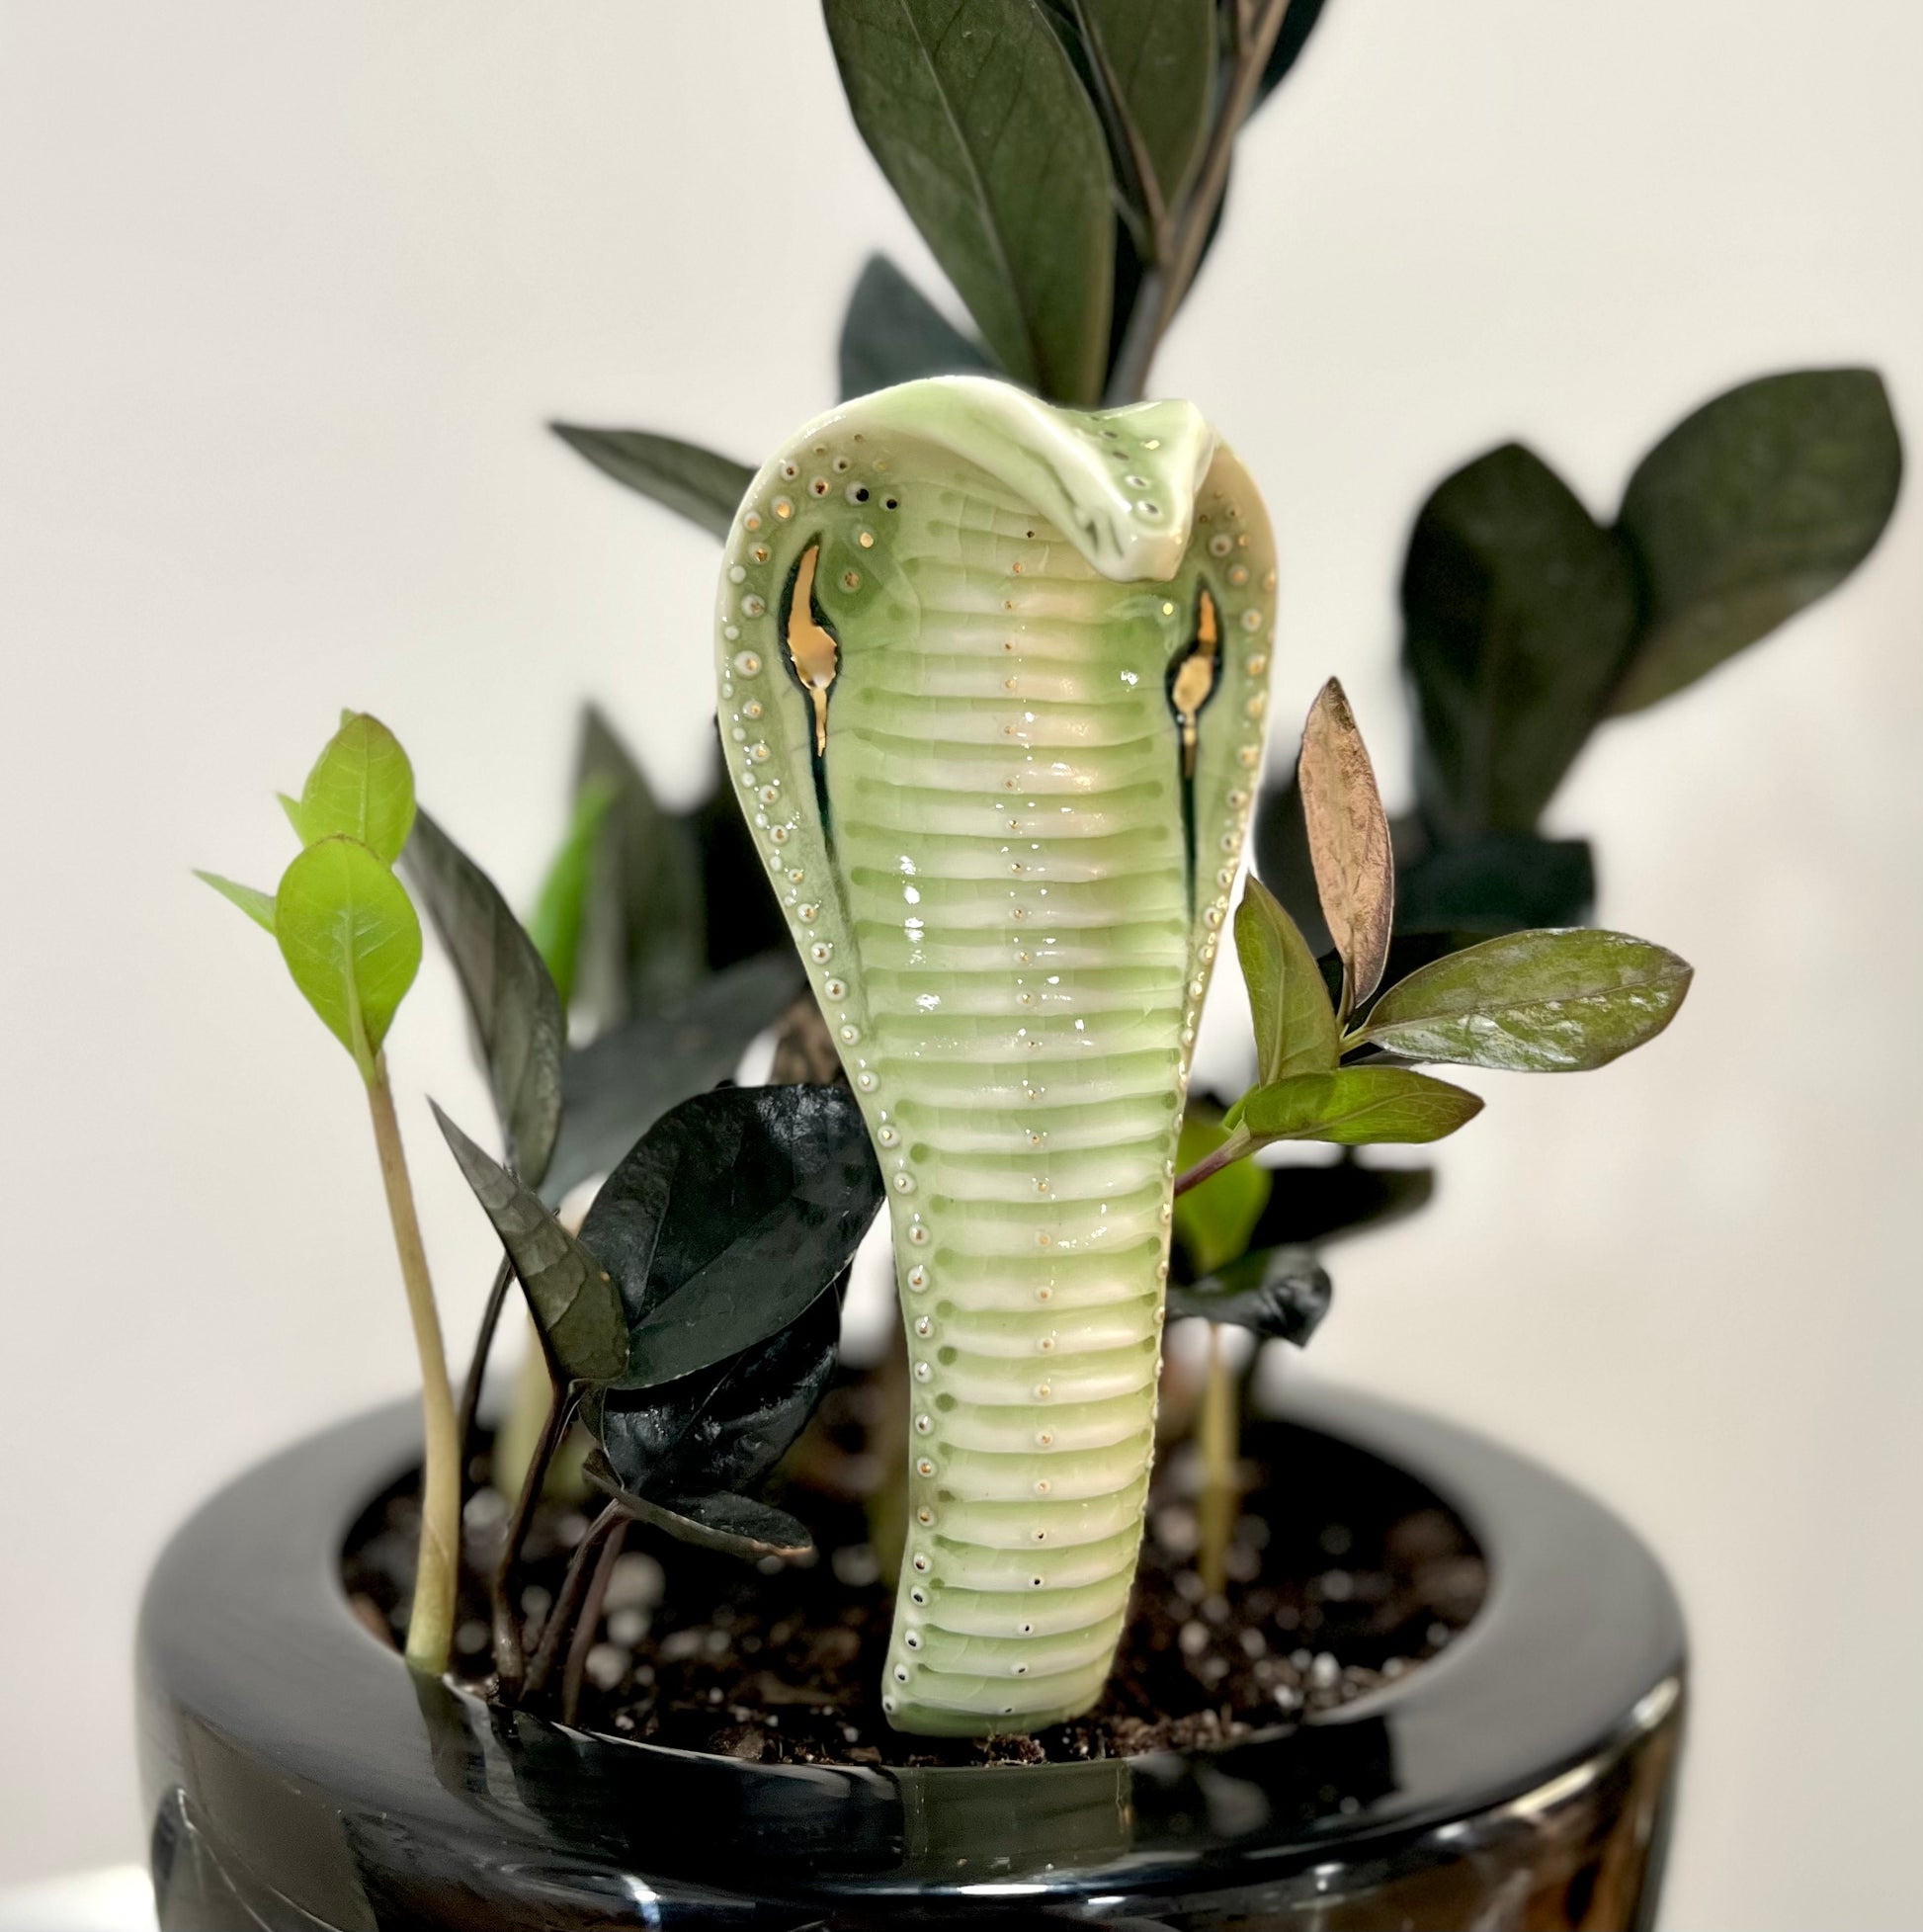 Product Image: Planter Snake 2 - Hand crafted Porcelain Home Ornament. Snake with Brass Rod for placing in pots with plants.